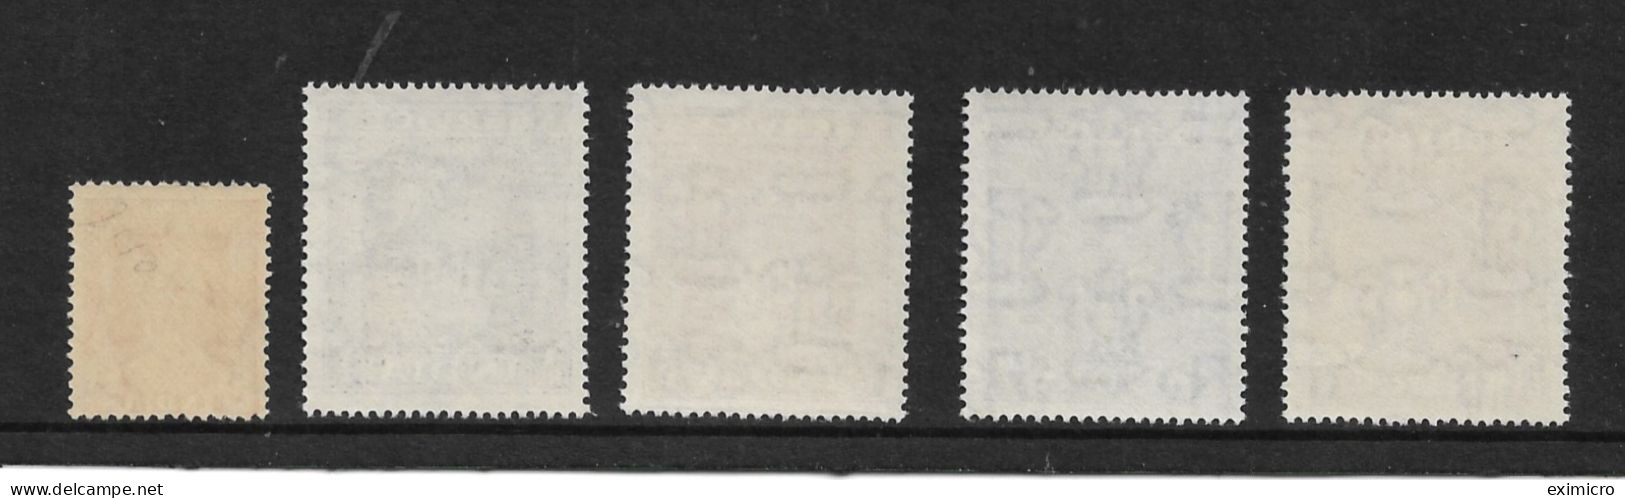 INDIA 1950 - 1951 OFFICIALS 3a, 1R - 10R SG O156, O161 - O164 UNMOUNTED MINT Cat £27.75 - Dienstmarken